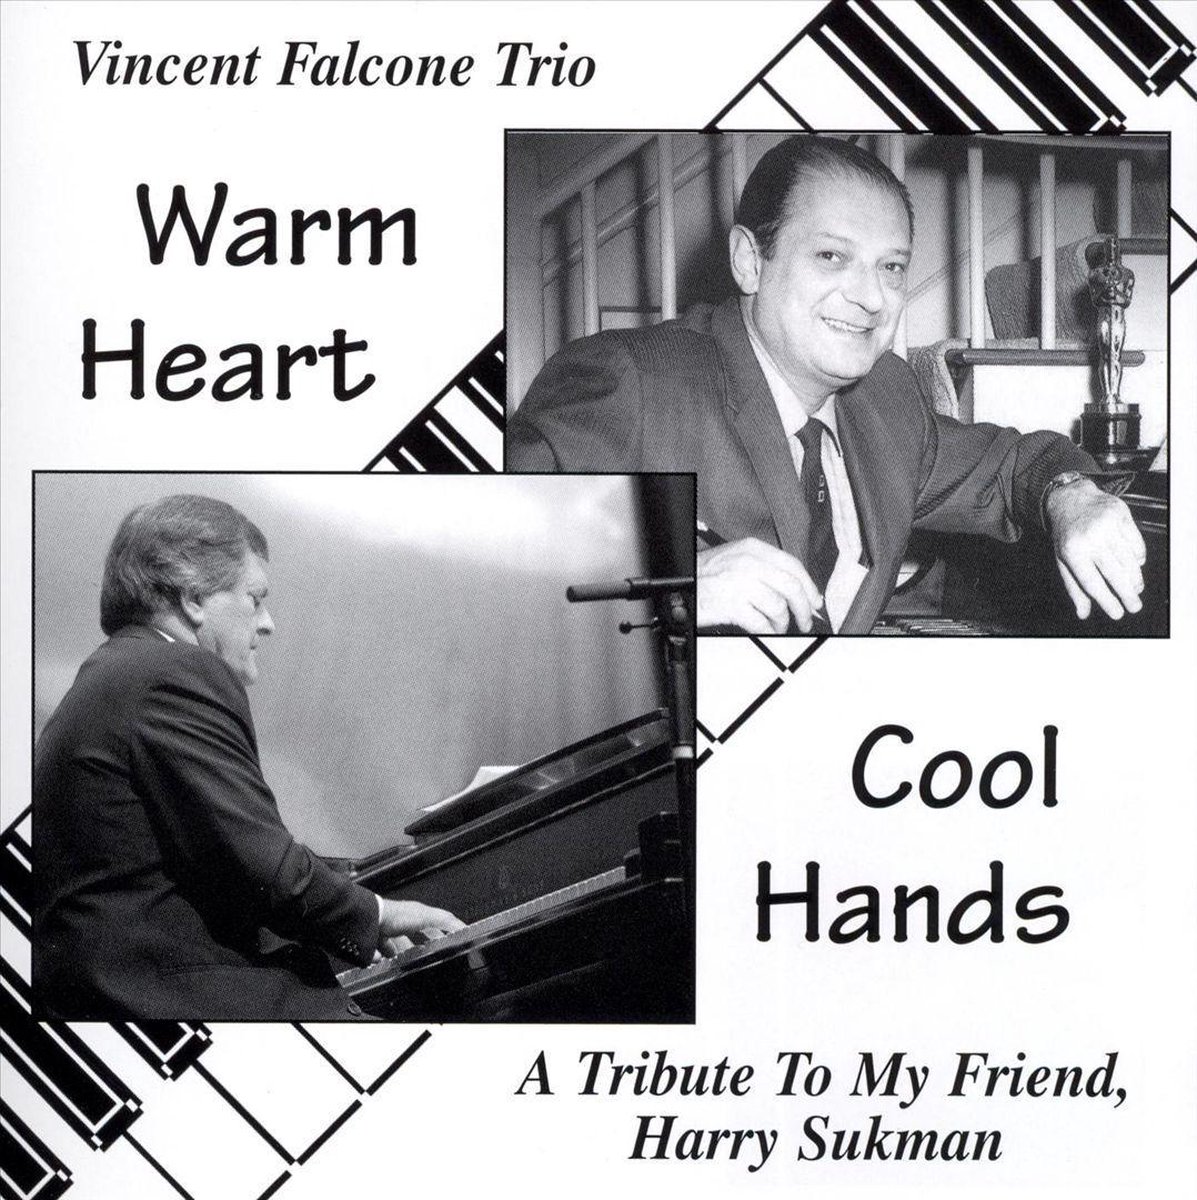 Afbeelding van product Warm Heart ... Cool Hands - A Tribute to My Friend, Harry Sukman  - Vincent Falcone Trio